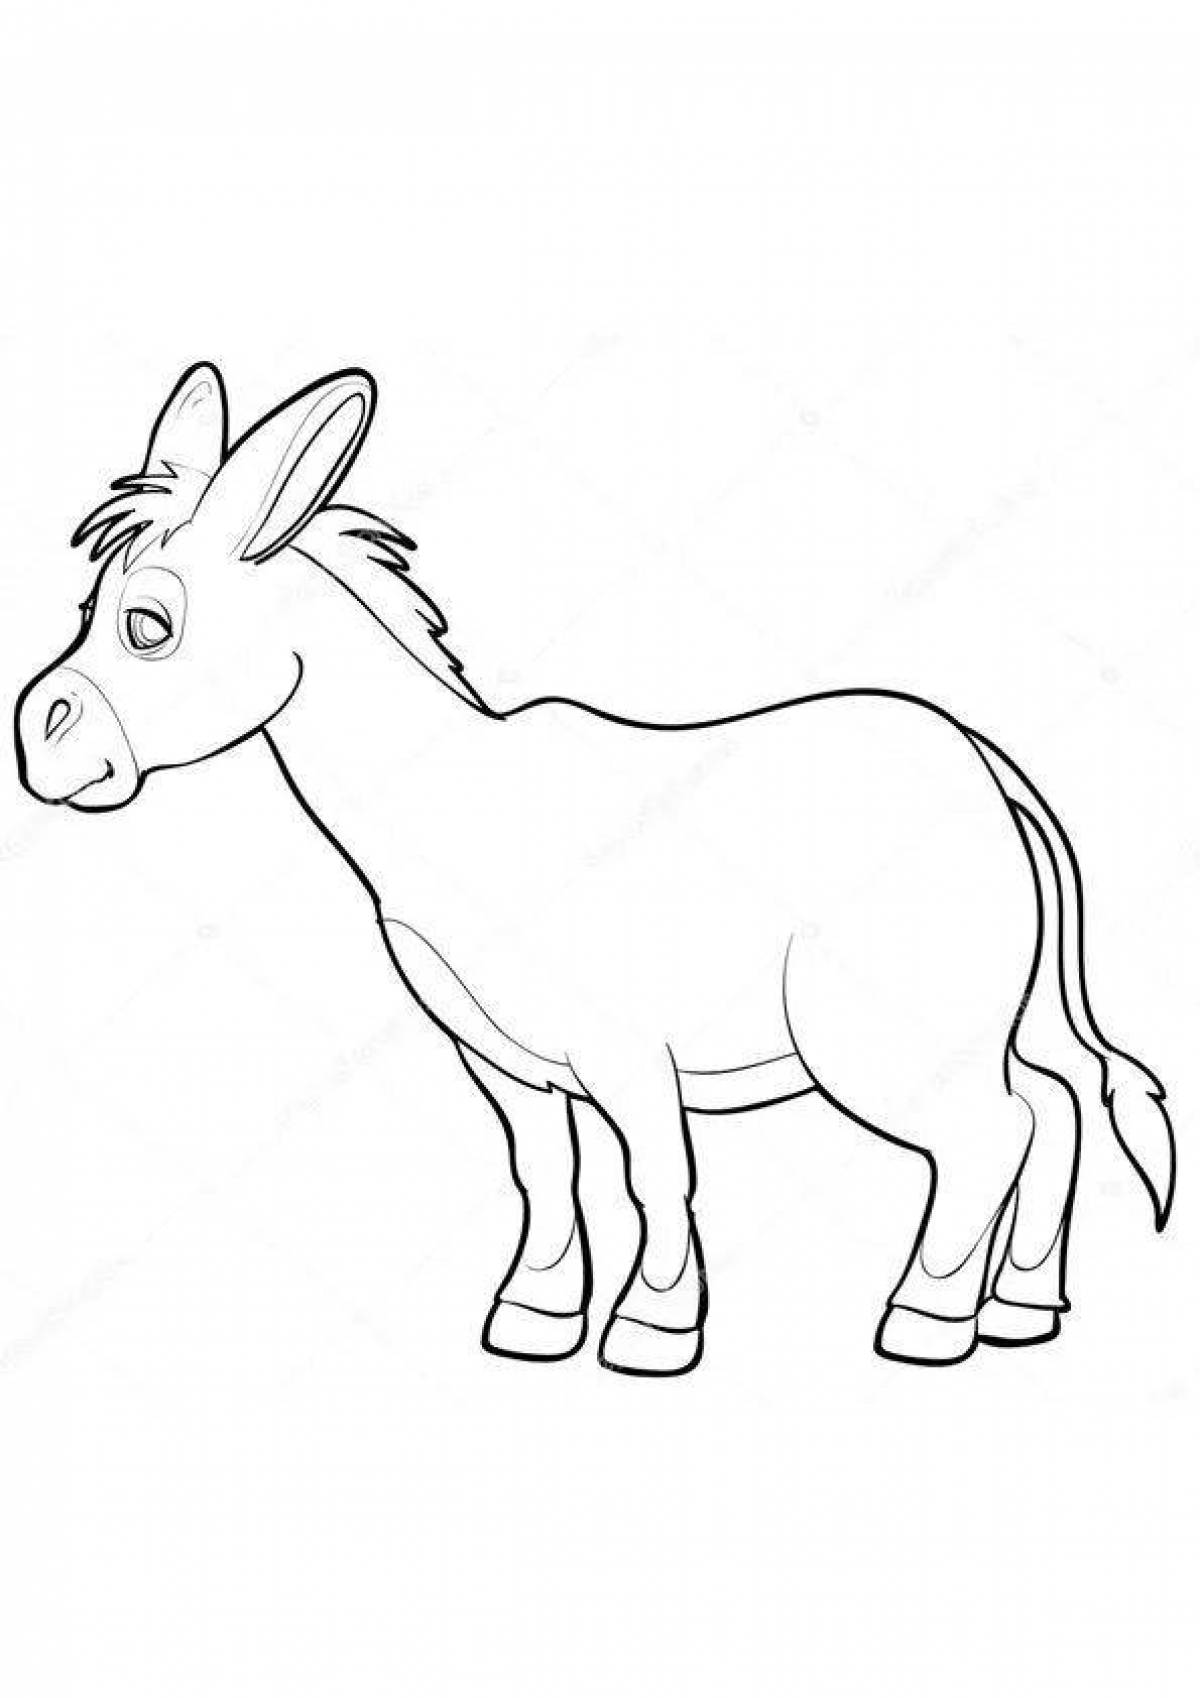 Cute donkey coloring book for kids